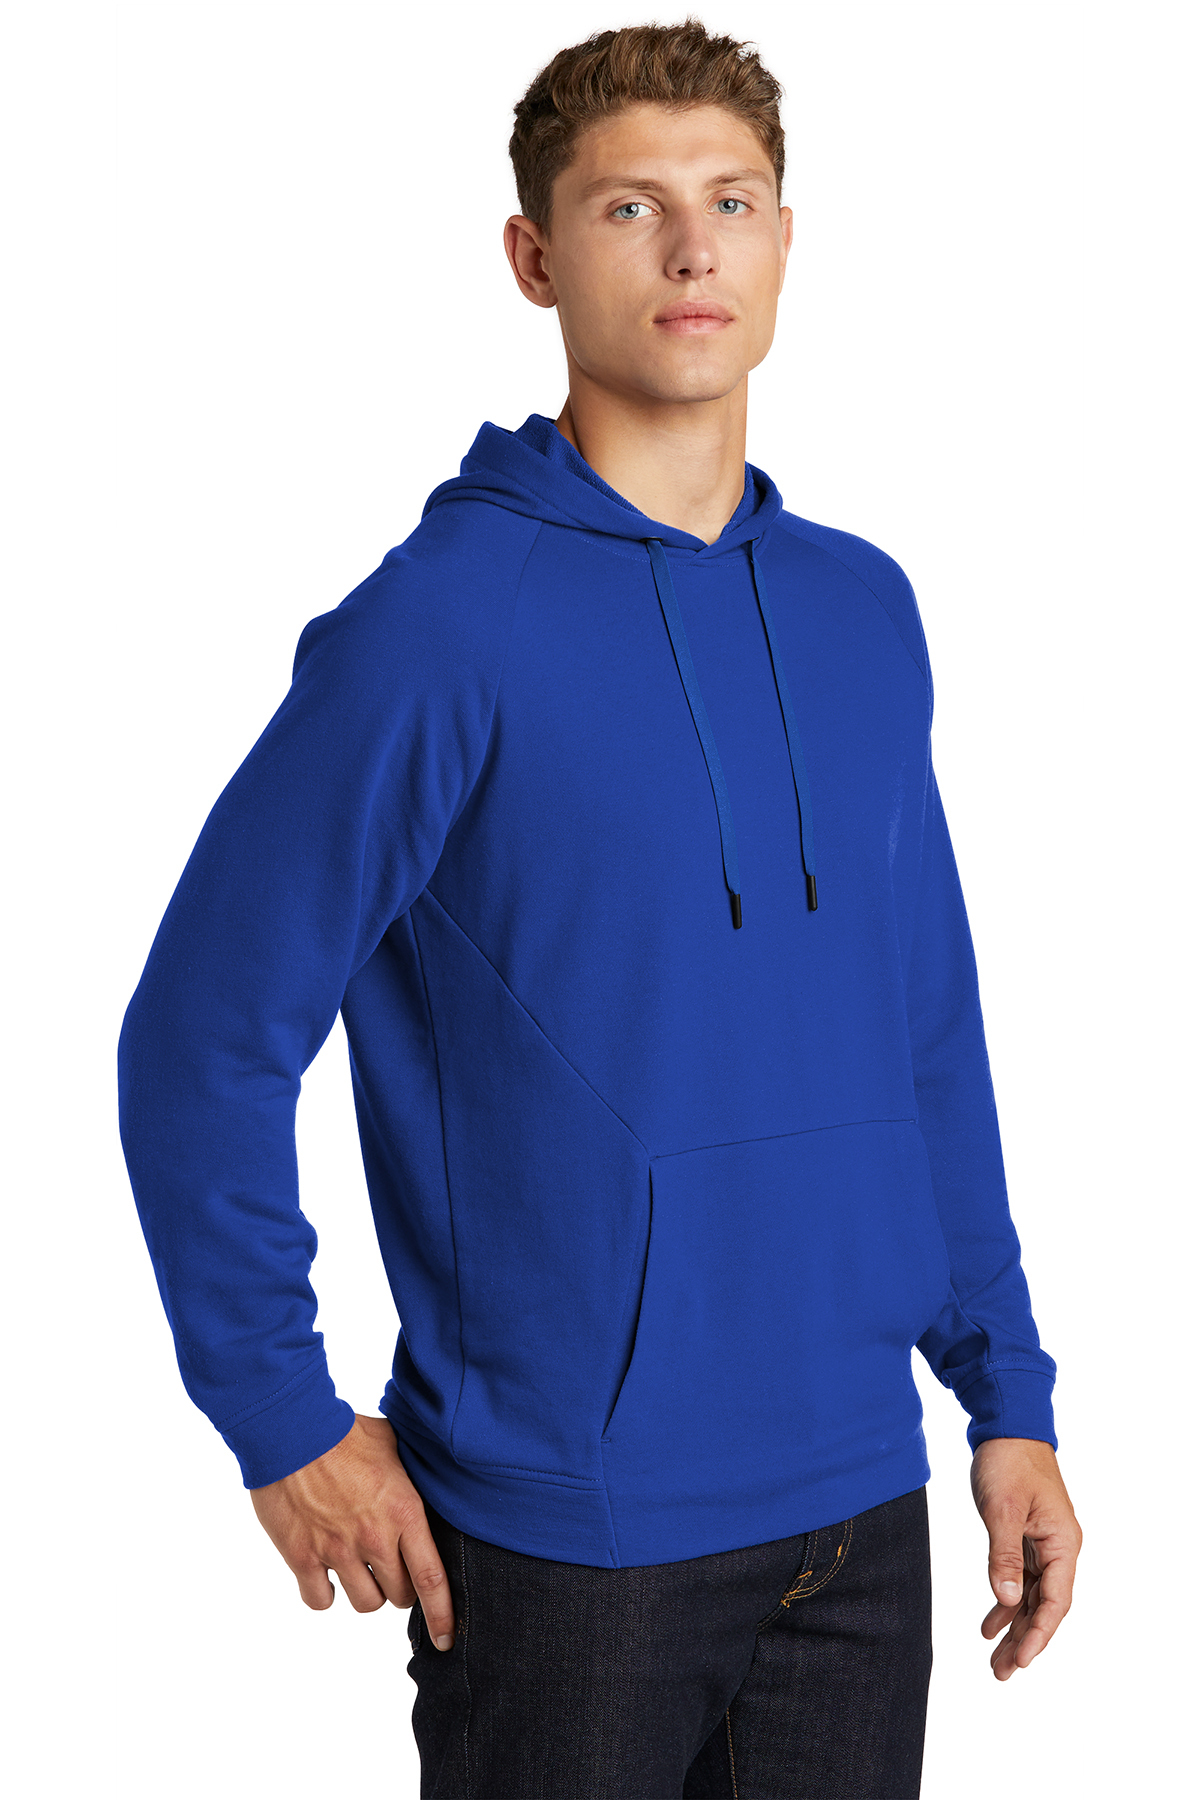 Sport-Tek Lightweight French Terry Pullover Hoodie | Product | Company ...